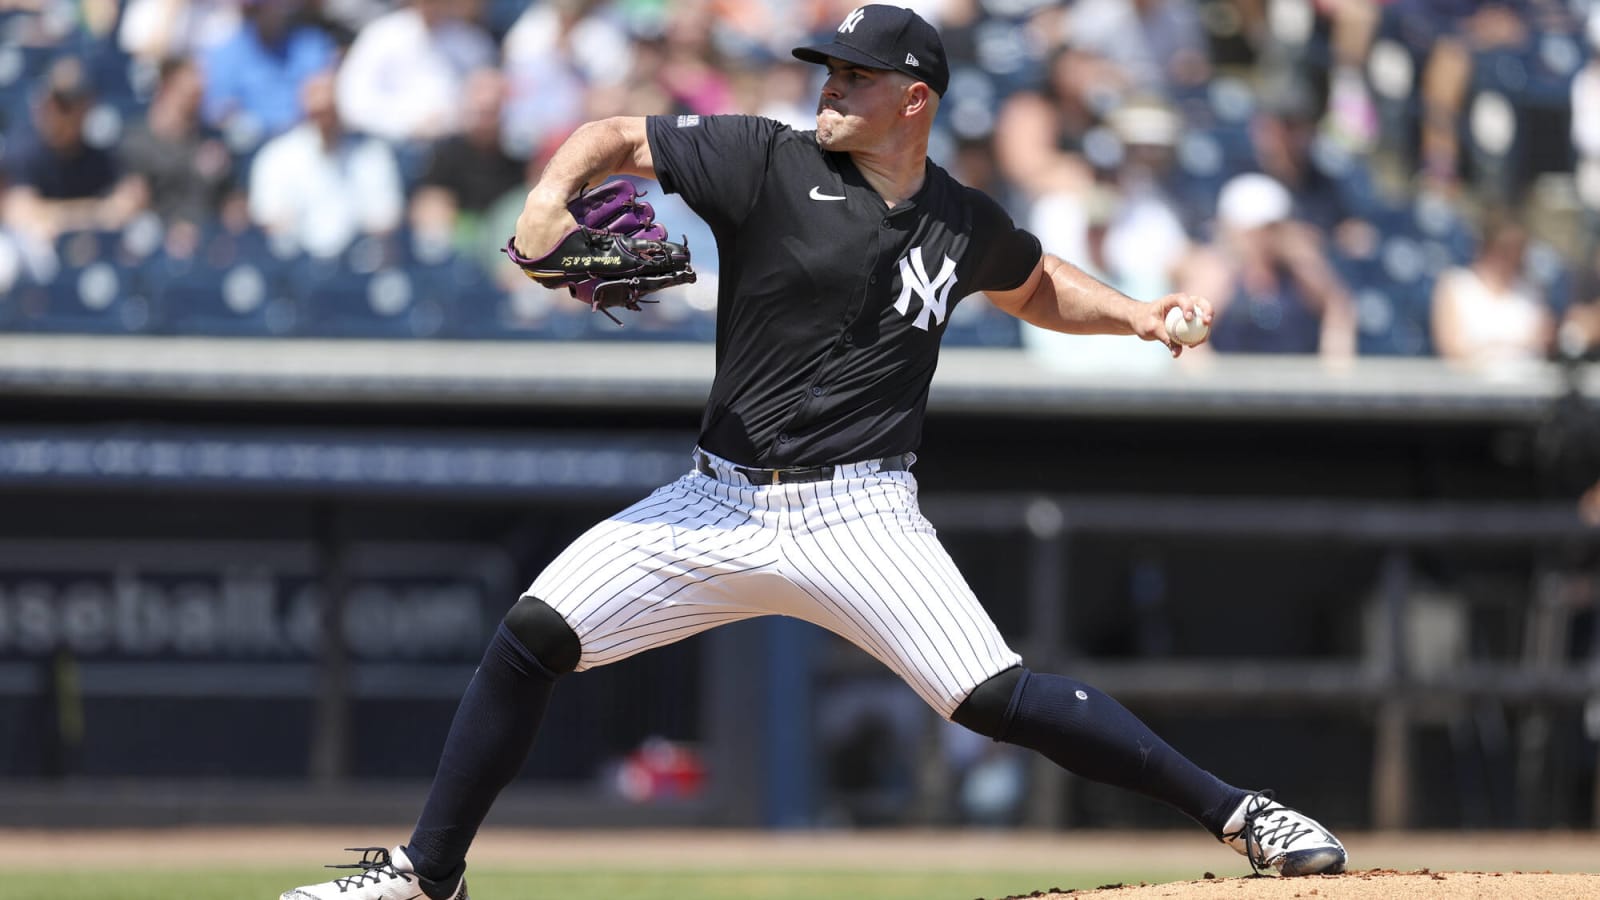 Yankees get flawless start from left-hander in 4-3 win over the Phillies